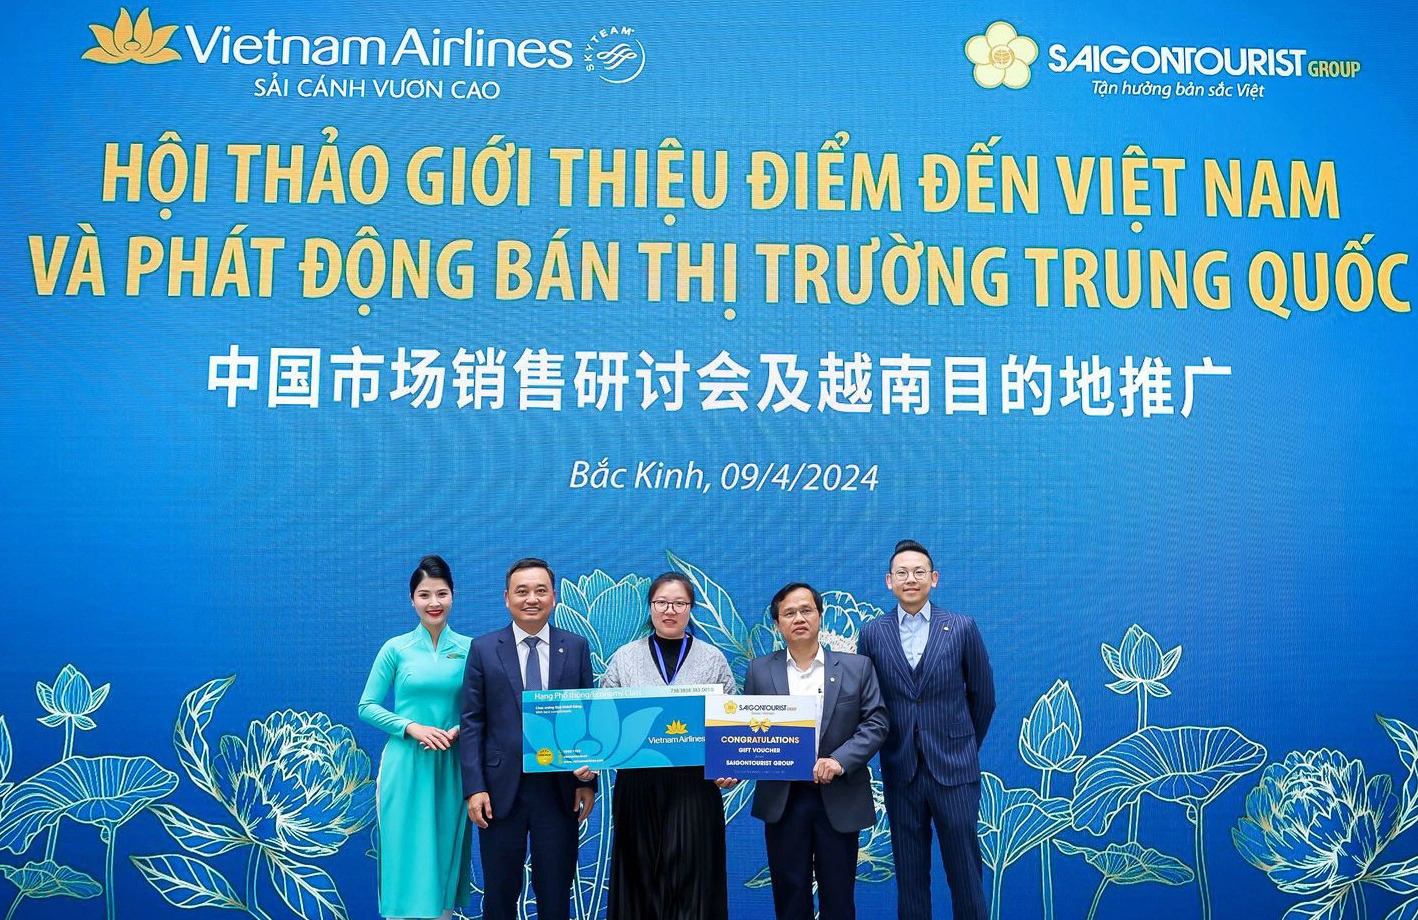 A guest receives lucky gifts which allow her to use Vietnam Airlines and Saigontourist Group services in a program promoting Vietnamese destinations in Beijing, China, April 9, 2024. Photo: Supplied